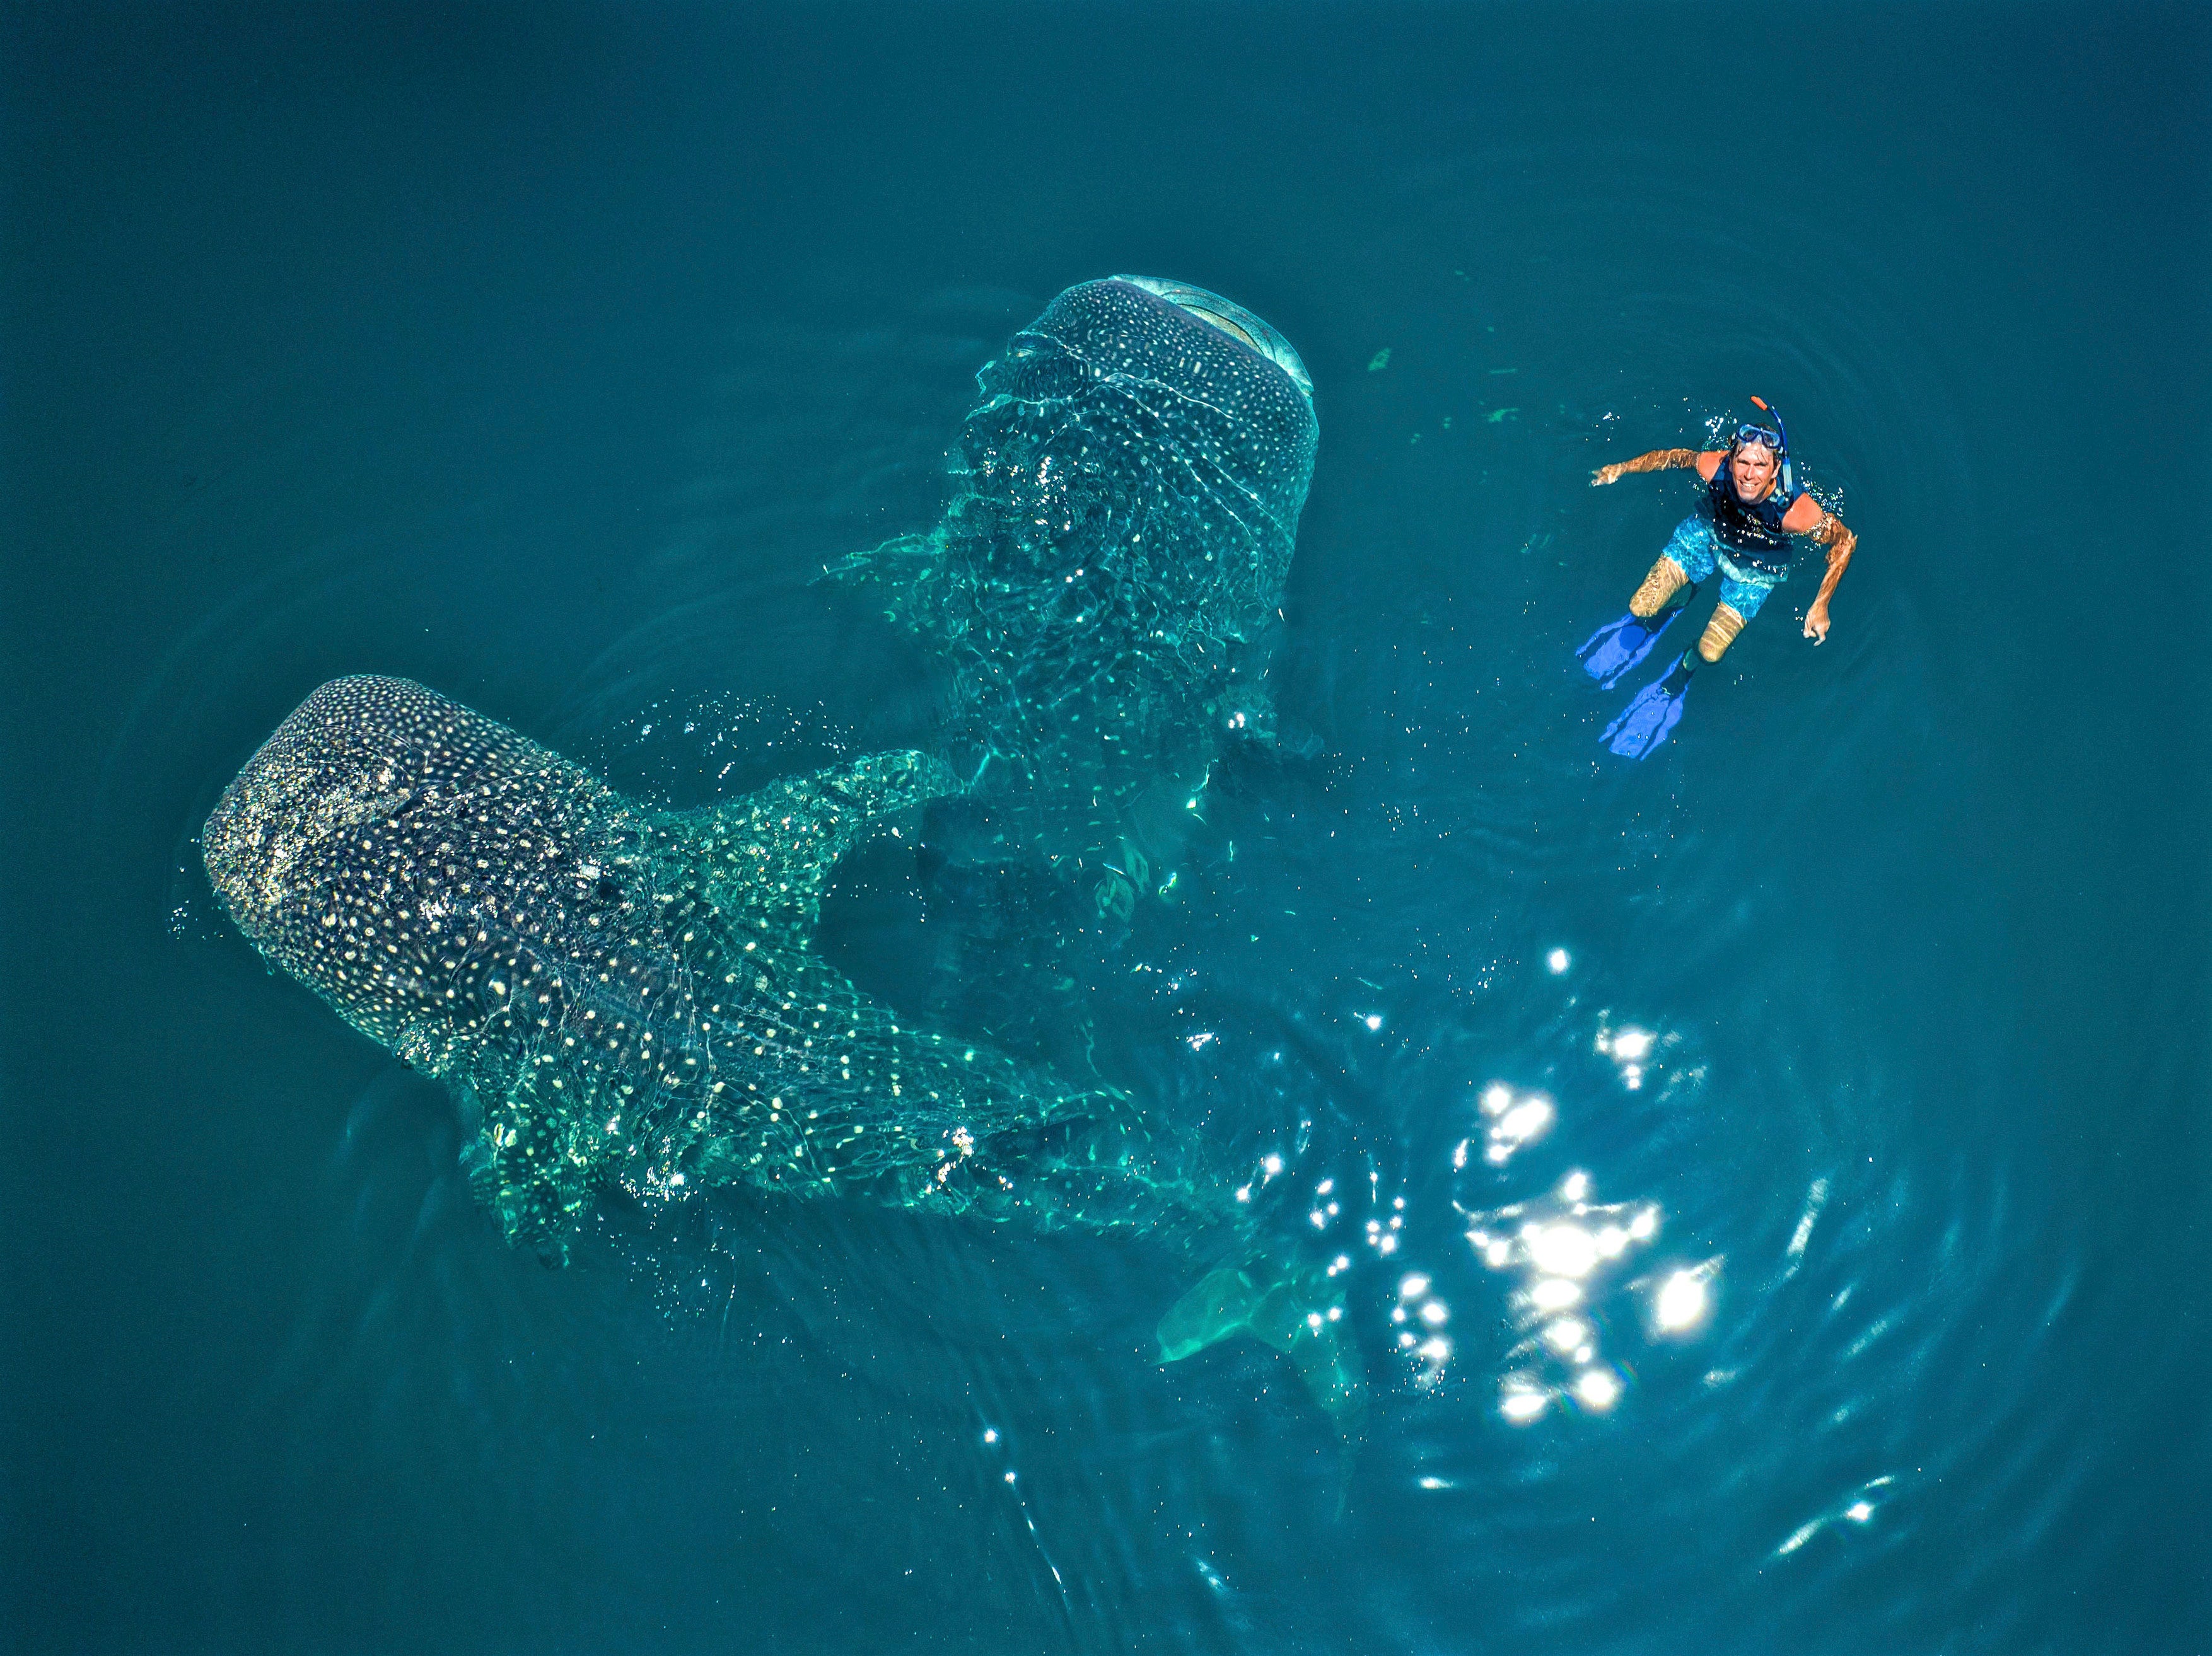 Reeve diving with whale sharks in the waters of the Coral Triangle